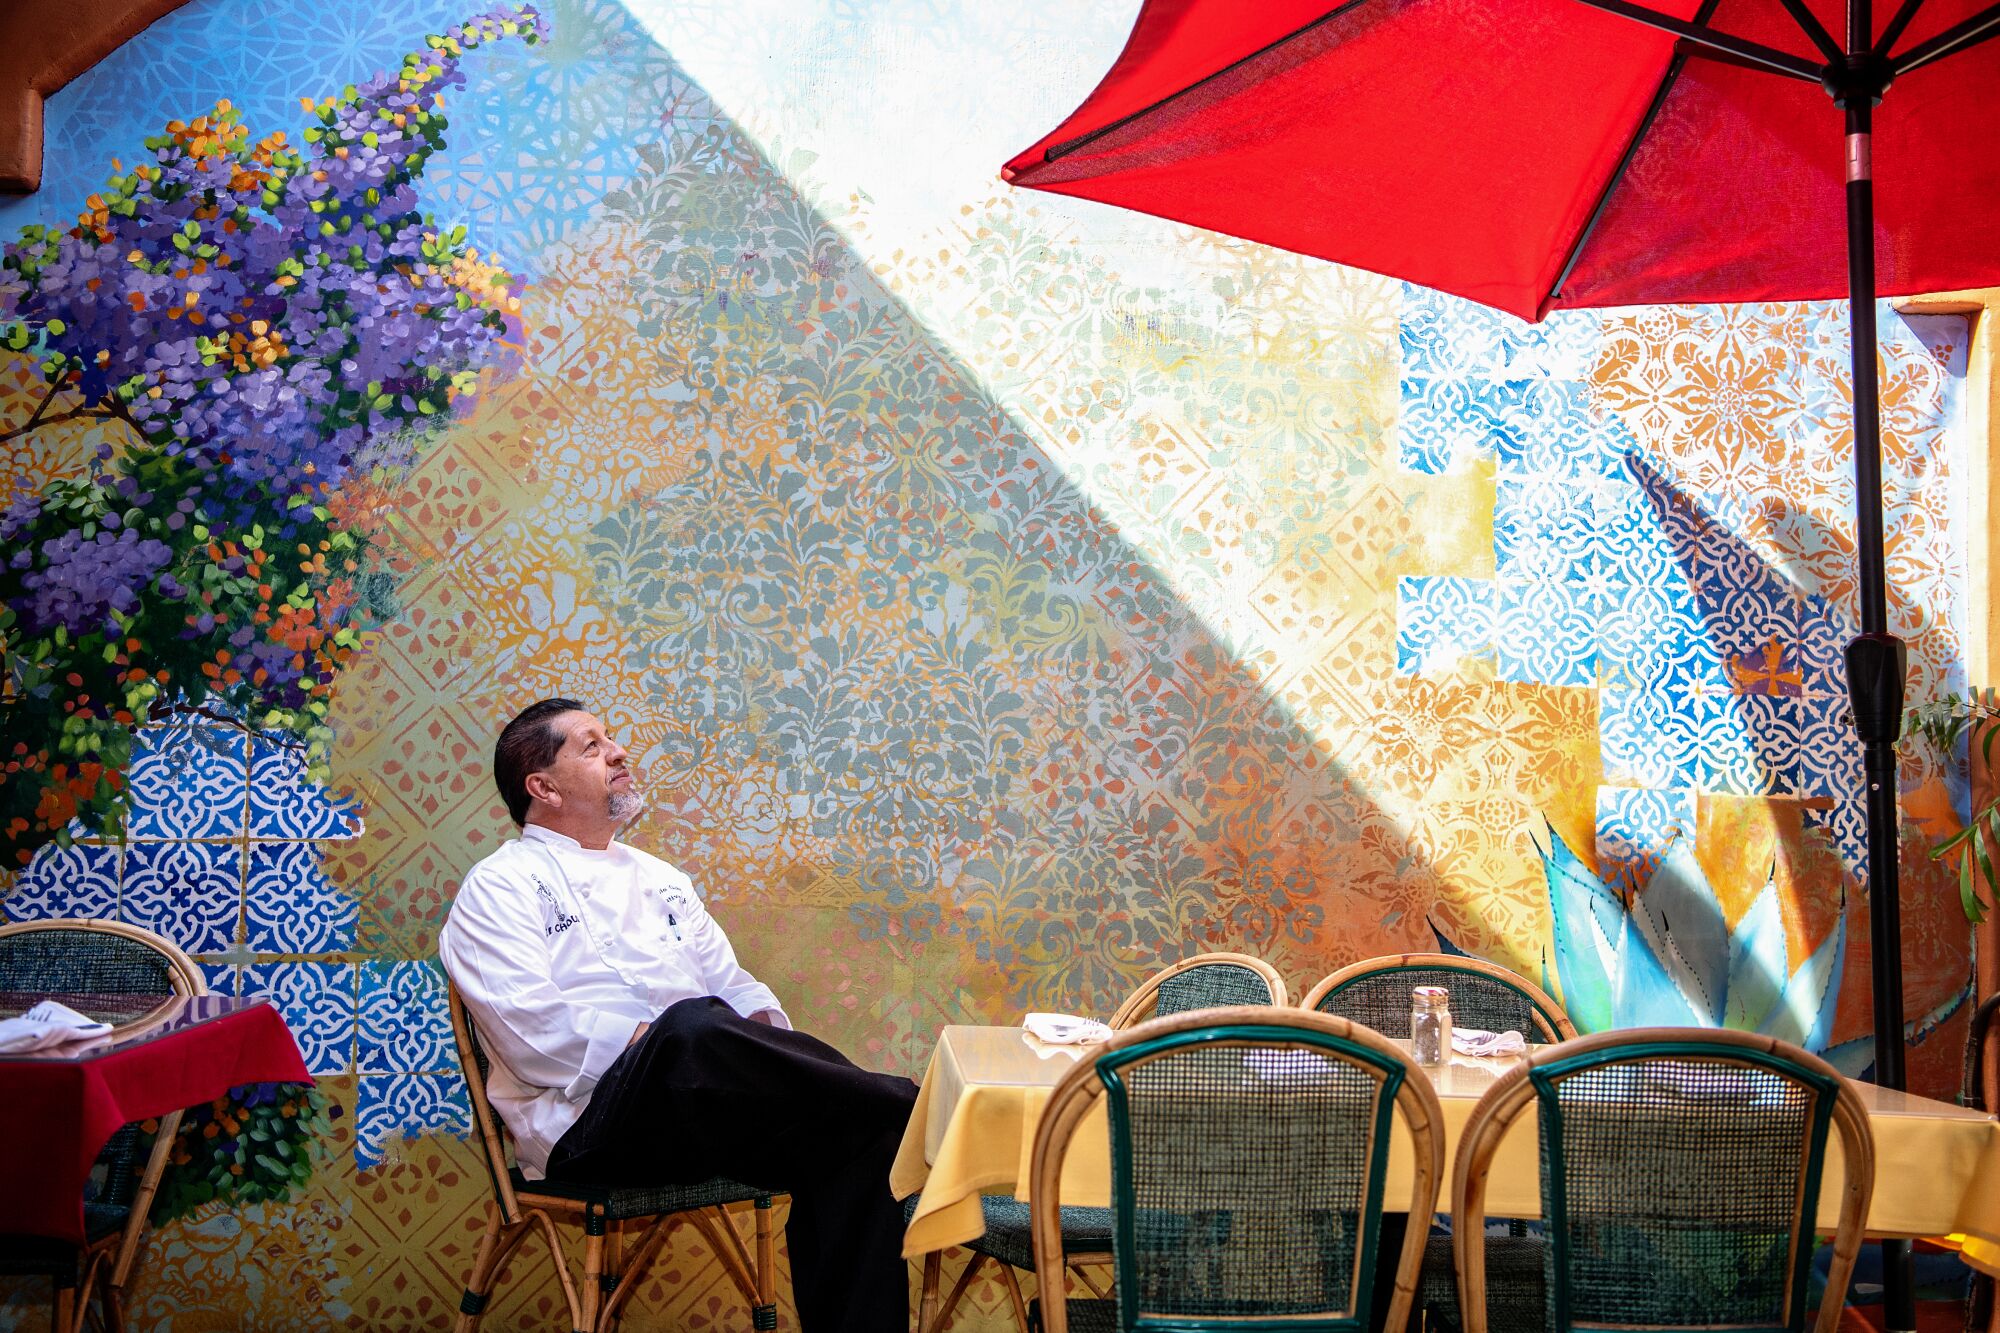 Sergio Ochoa seated at an outdoor table, in front of an ornate mural.